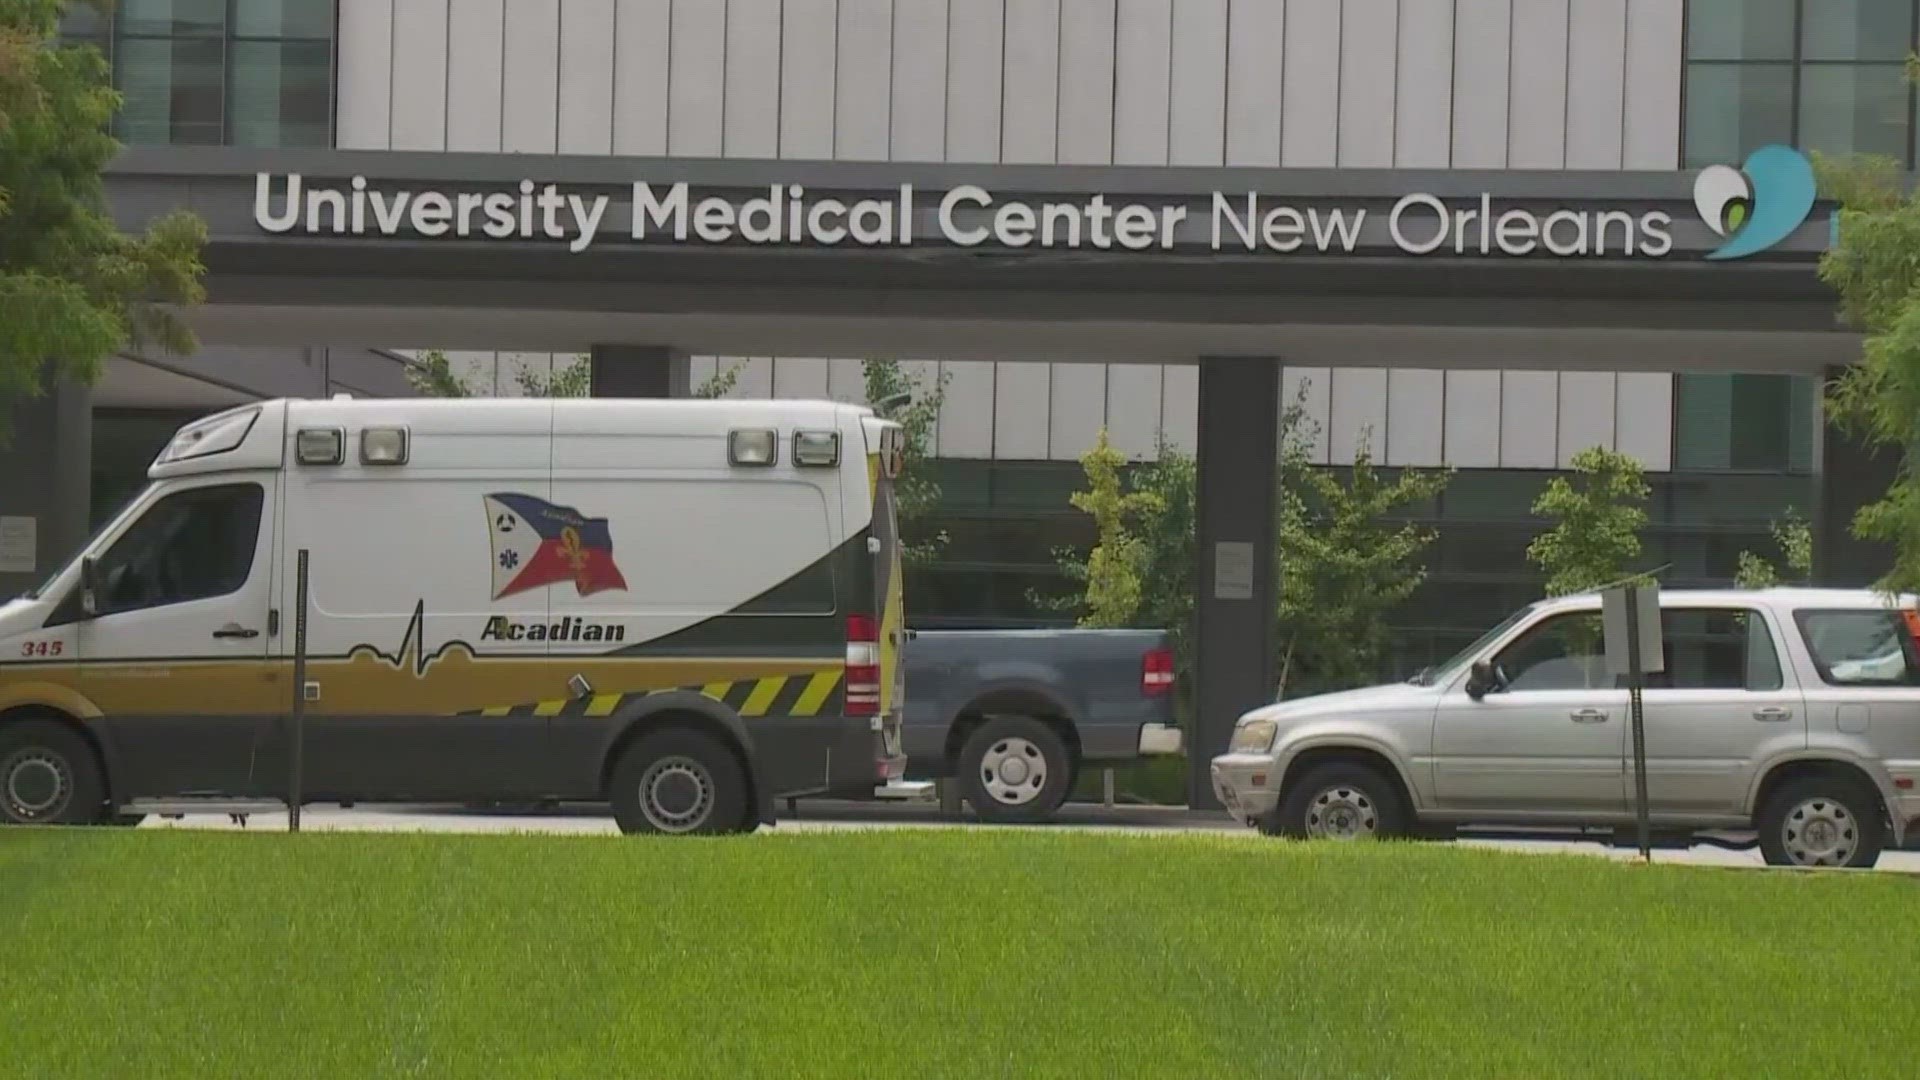 Nurses at UMC say they want to vote on a union. The medical center said they will allow it.